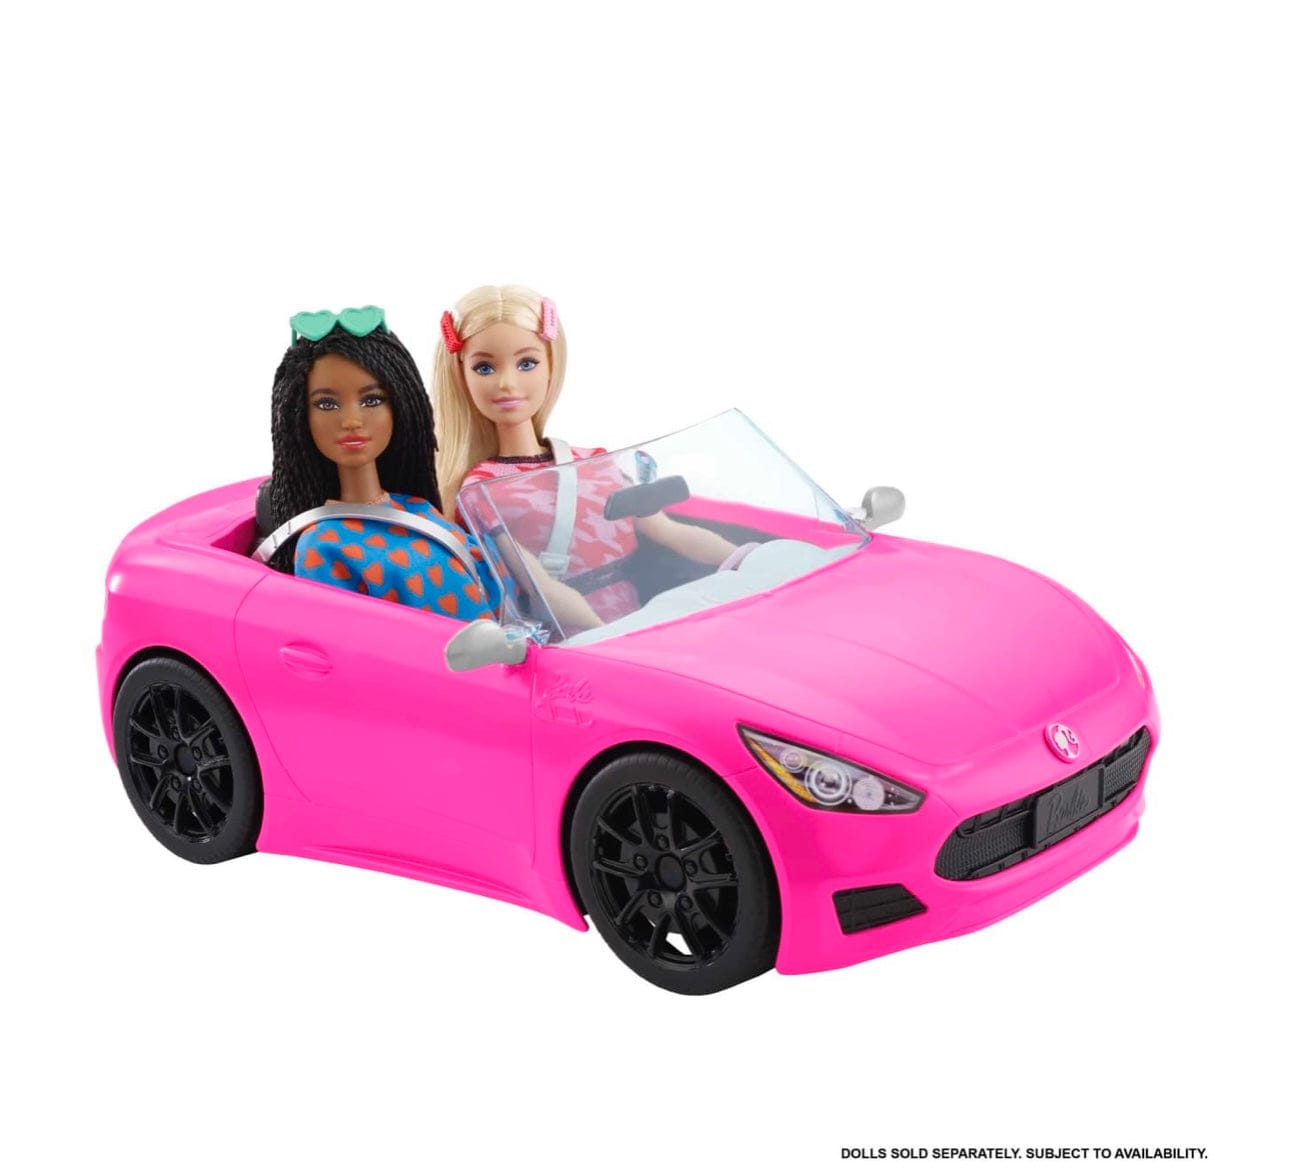 Barbie Pink Convertible 2-Seater Vehicle with Rolling Wheels and Barbie Doll Star Dress